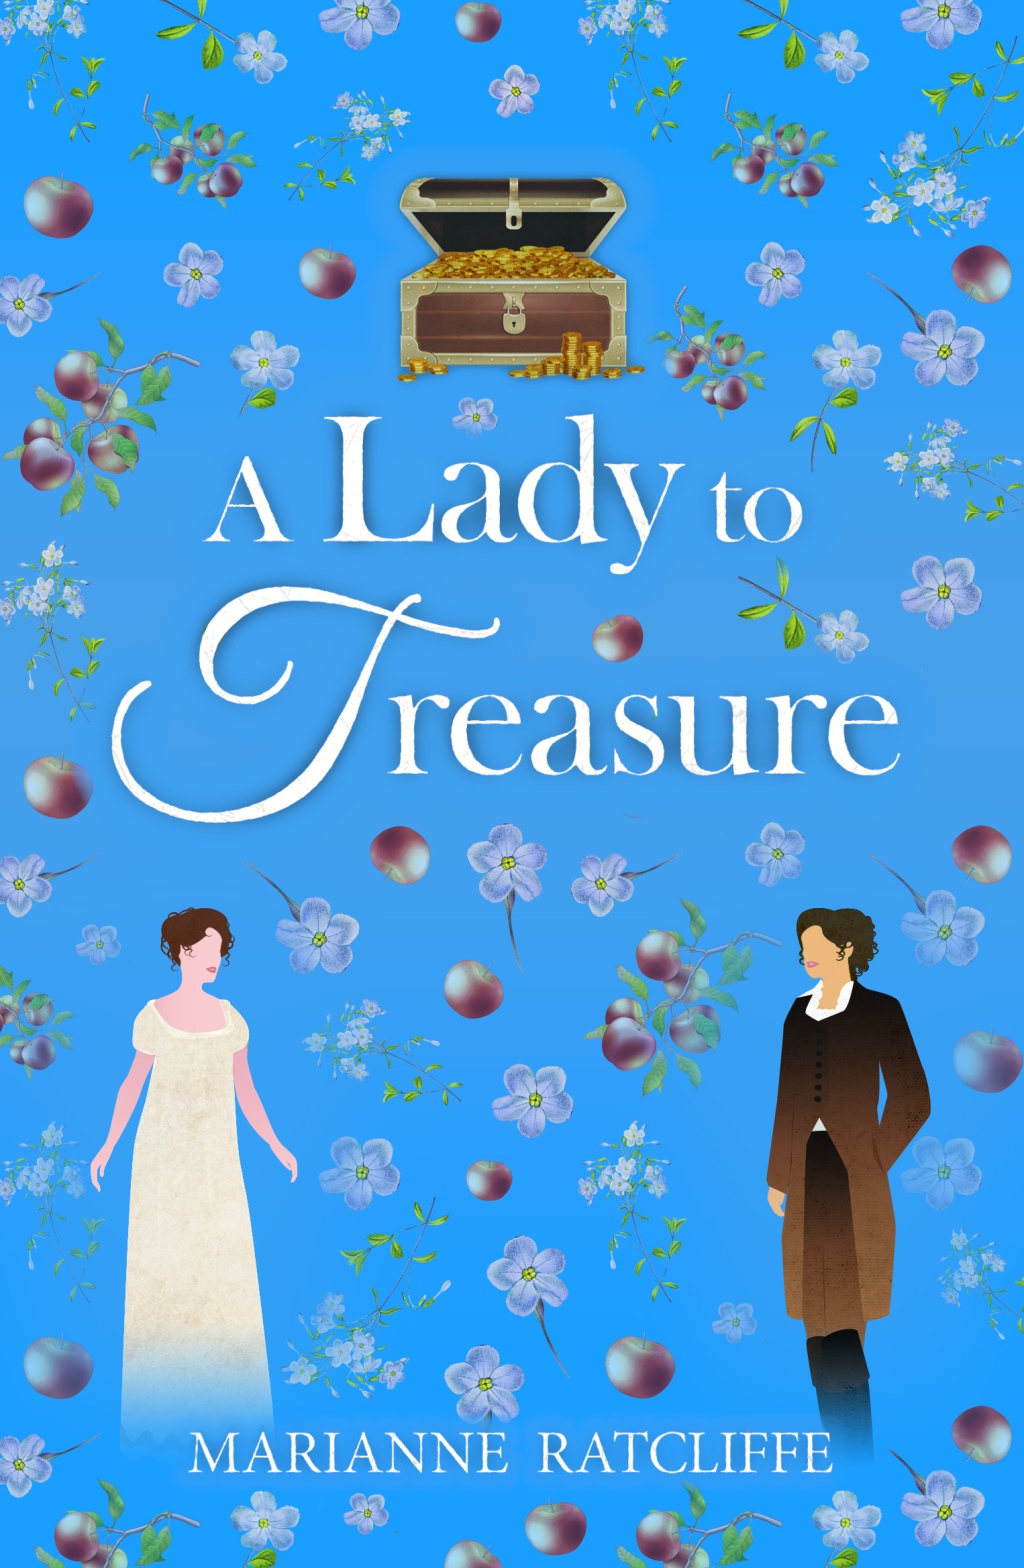 Book Review: A Lady to Treasure by Marianne Ratcliffe (romance, lesbian)